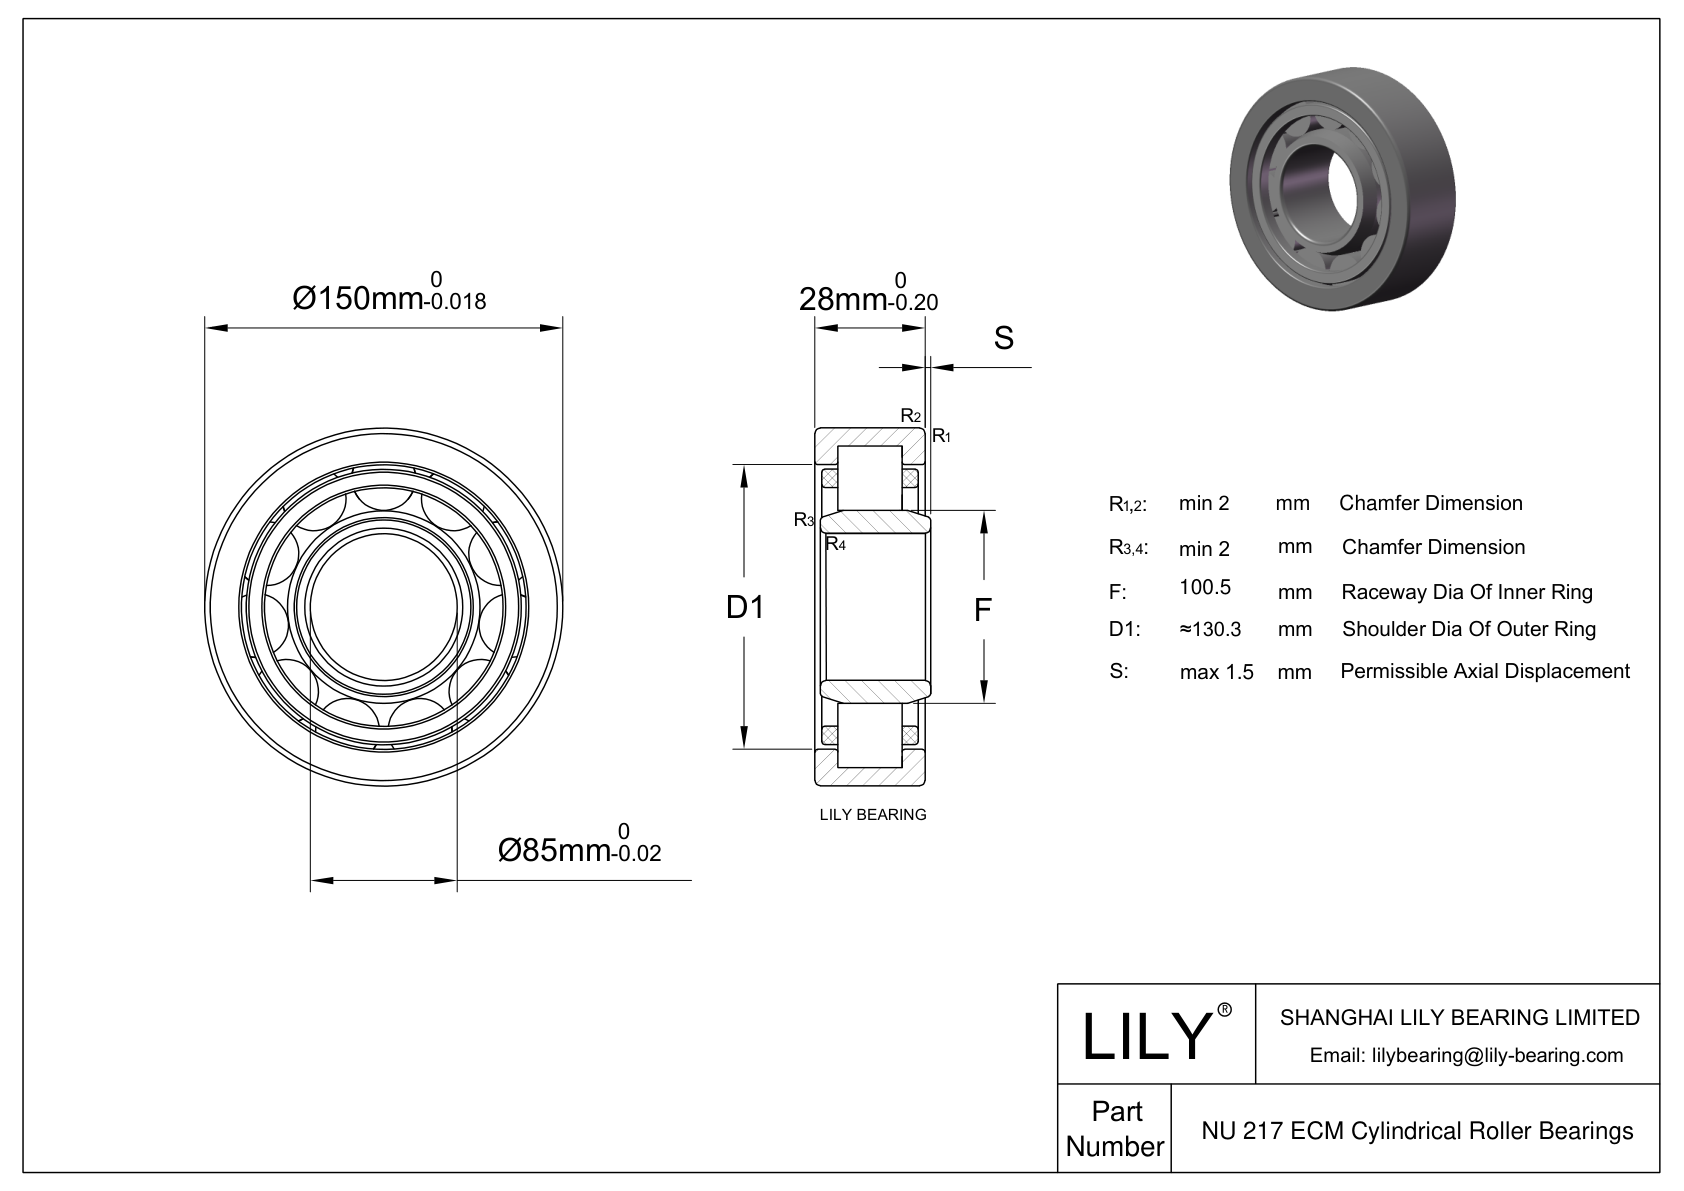 NU 217 ECM/C3VL0241 Ceramic Coated Cylindrical Roller Bearings cad drawing